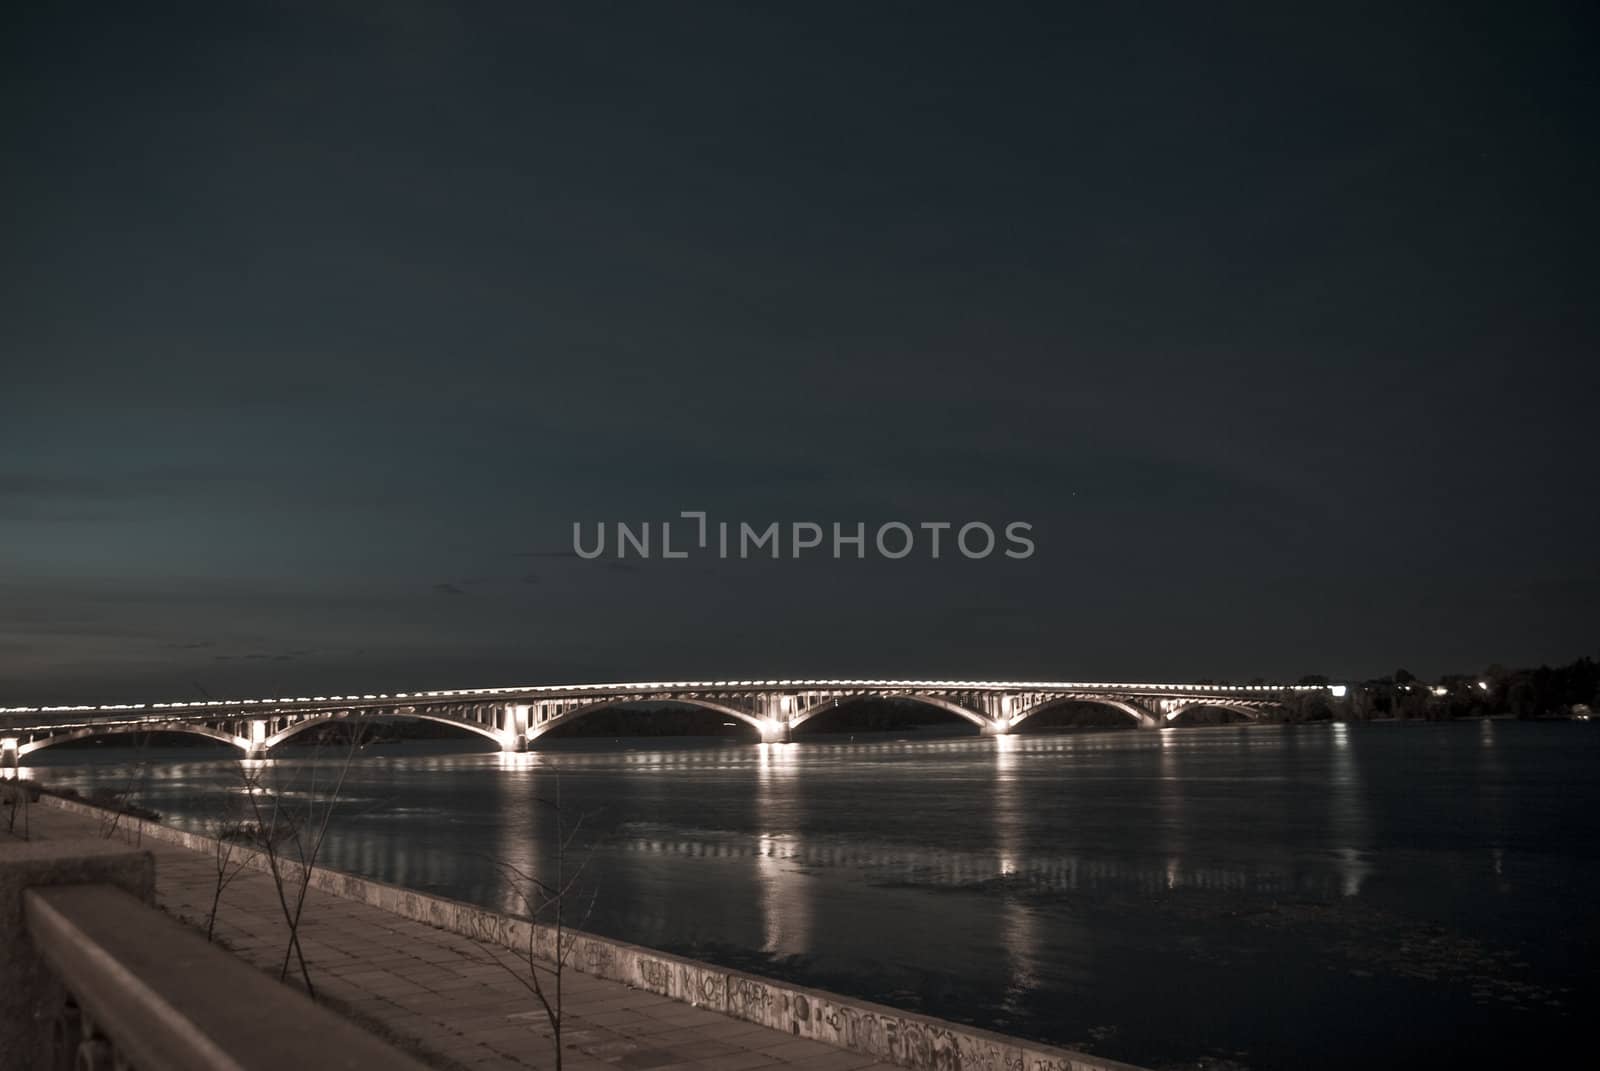 The city bridge at night all on fires by jincomplete